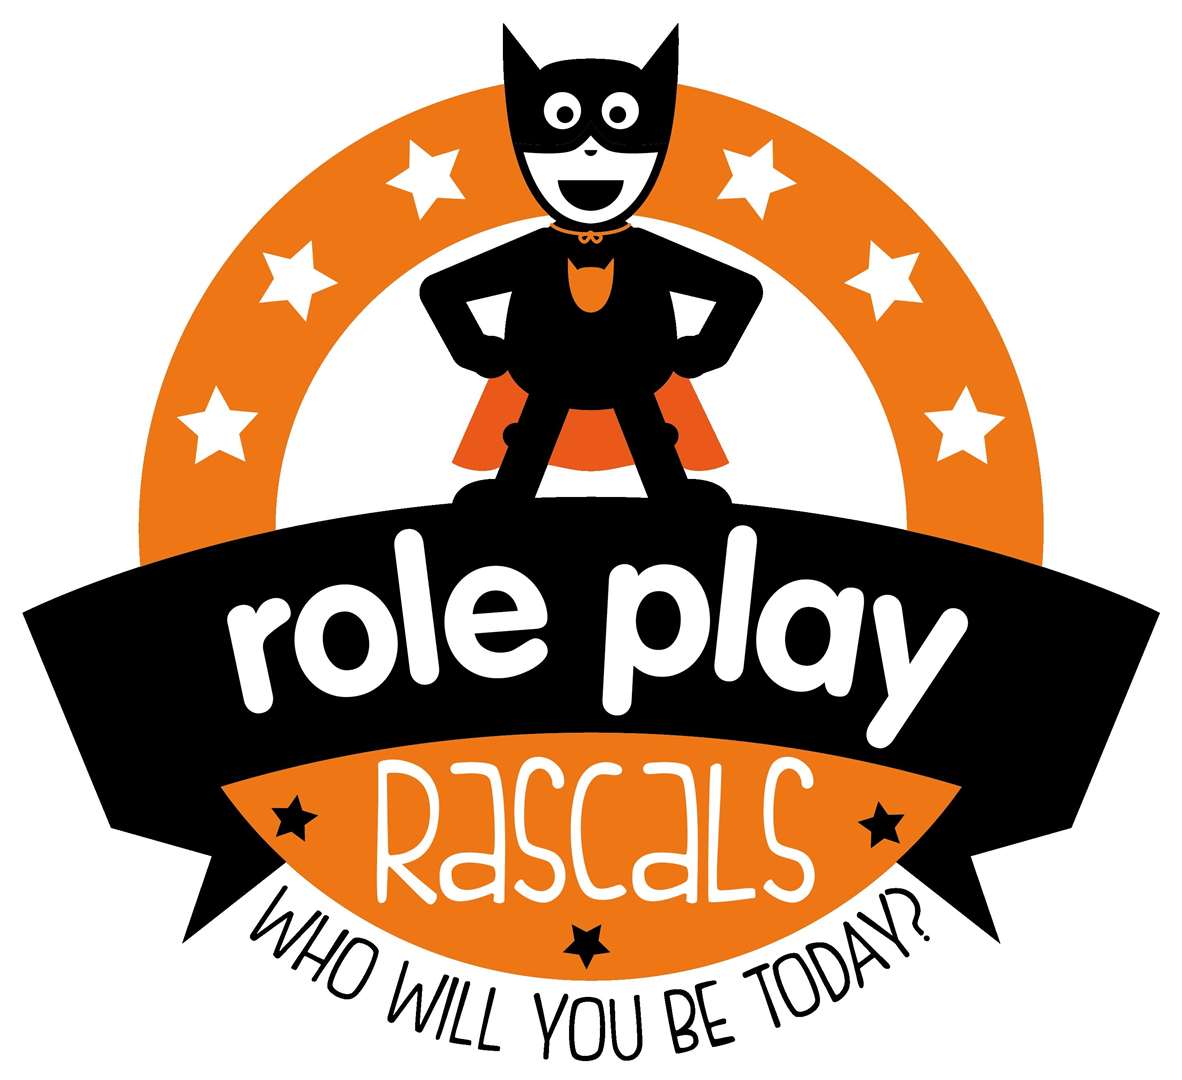 Role Play Rascals is in Faversham